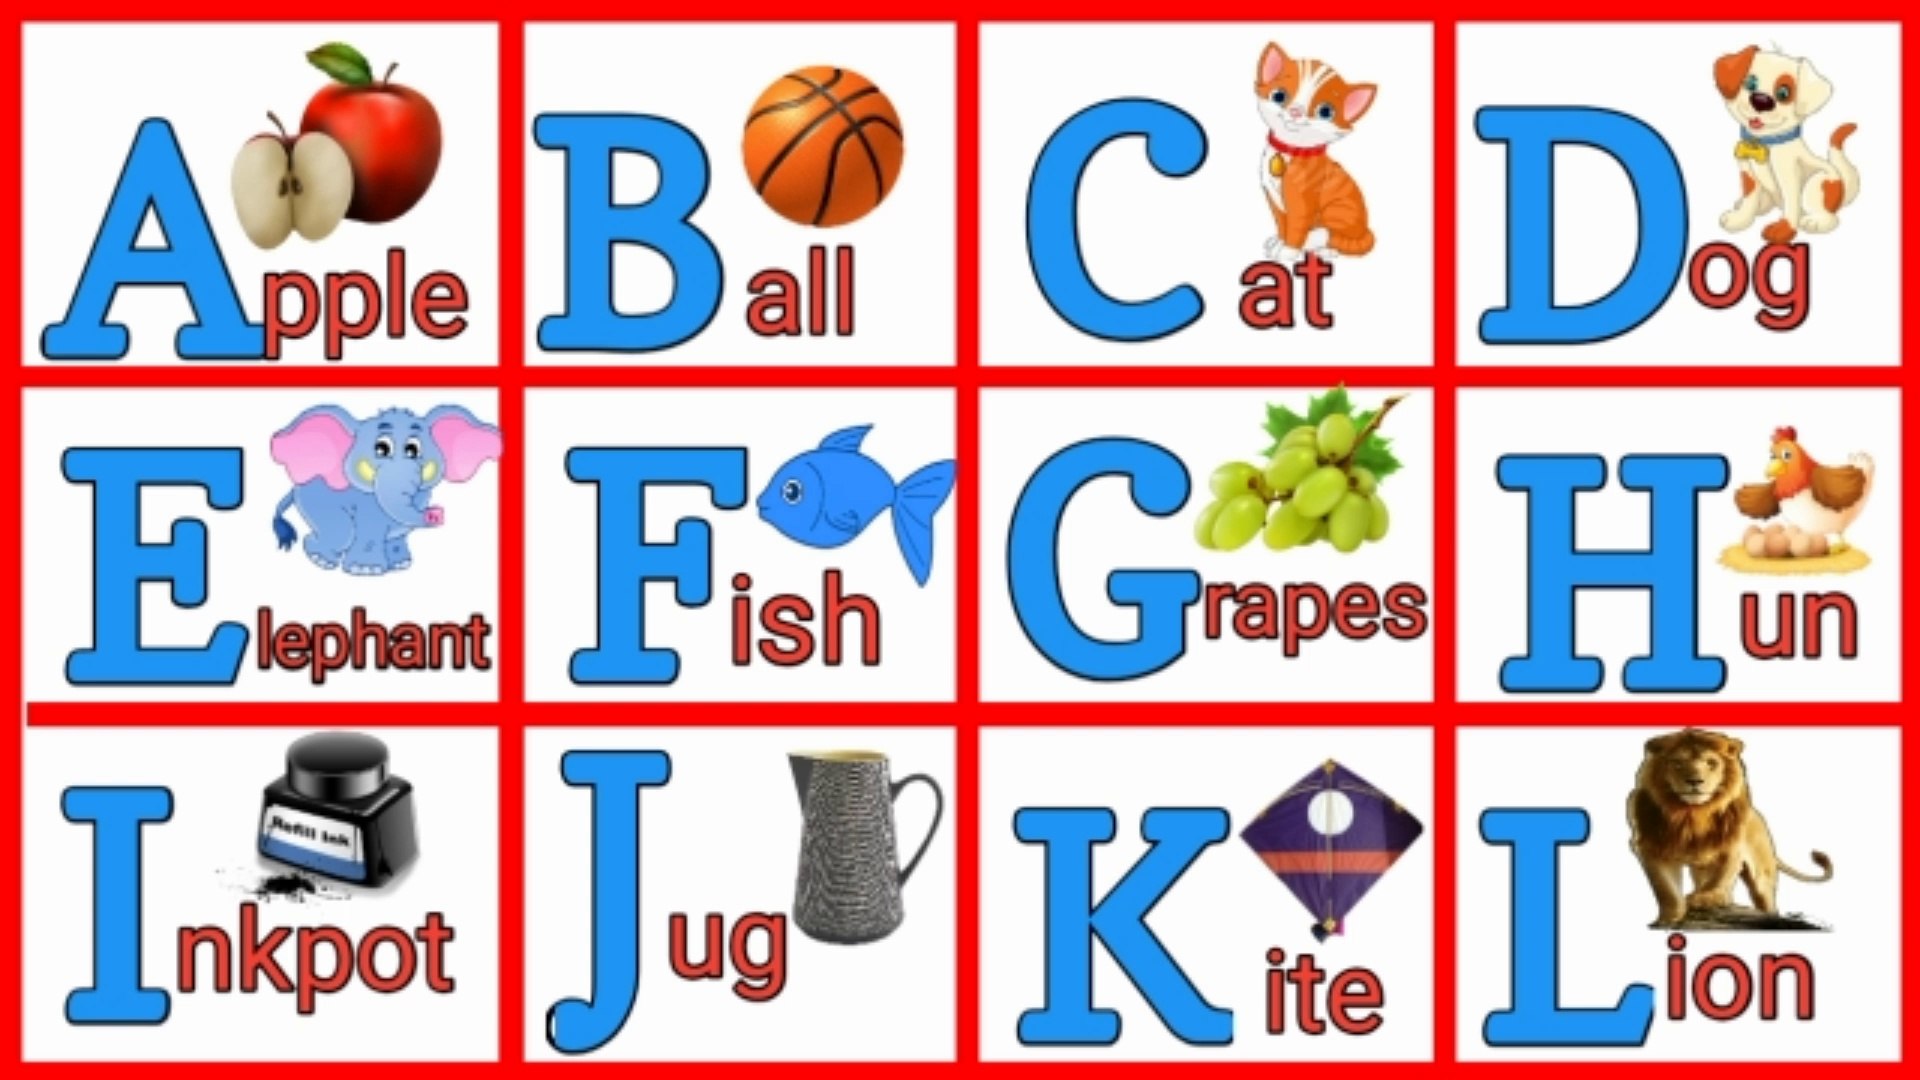 A For Apple B For Boll English Varnamala Hindi Alphabets Alphabets Hindi Varnamala Baby A For Apple B For Ball C For Cat Abc Phonics Song With Image Alphabets For Kids Alphabets